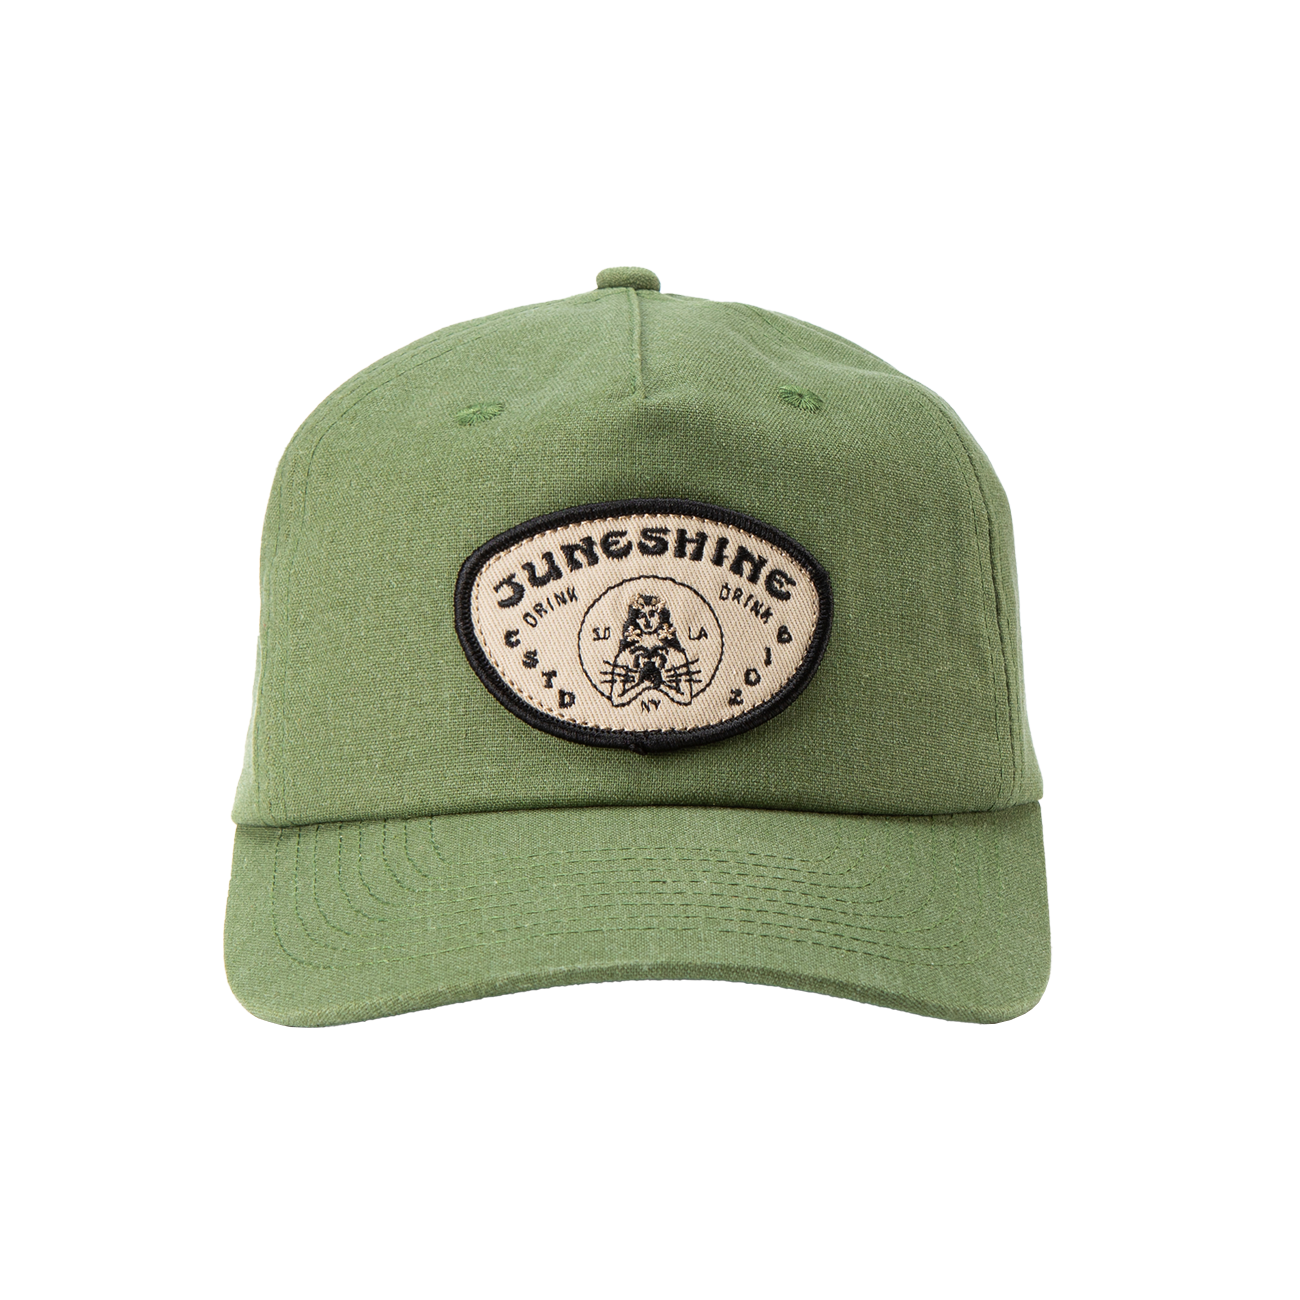 Front view green dad hat with an oval patch that reads; "June Shine drink drink ESTD 2018 SD NY LA" and image of woman holding a pineapple.